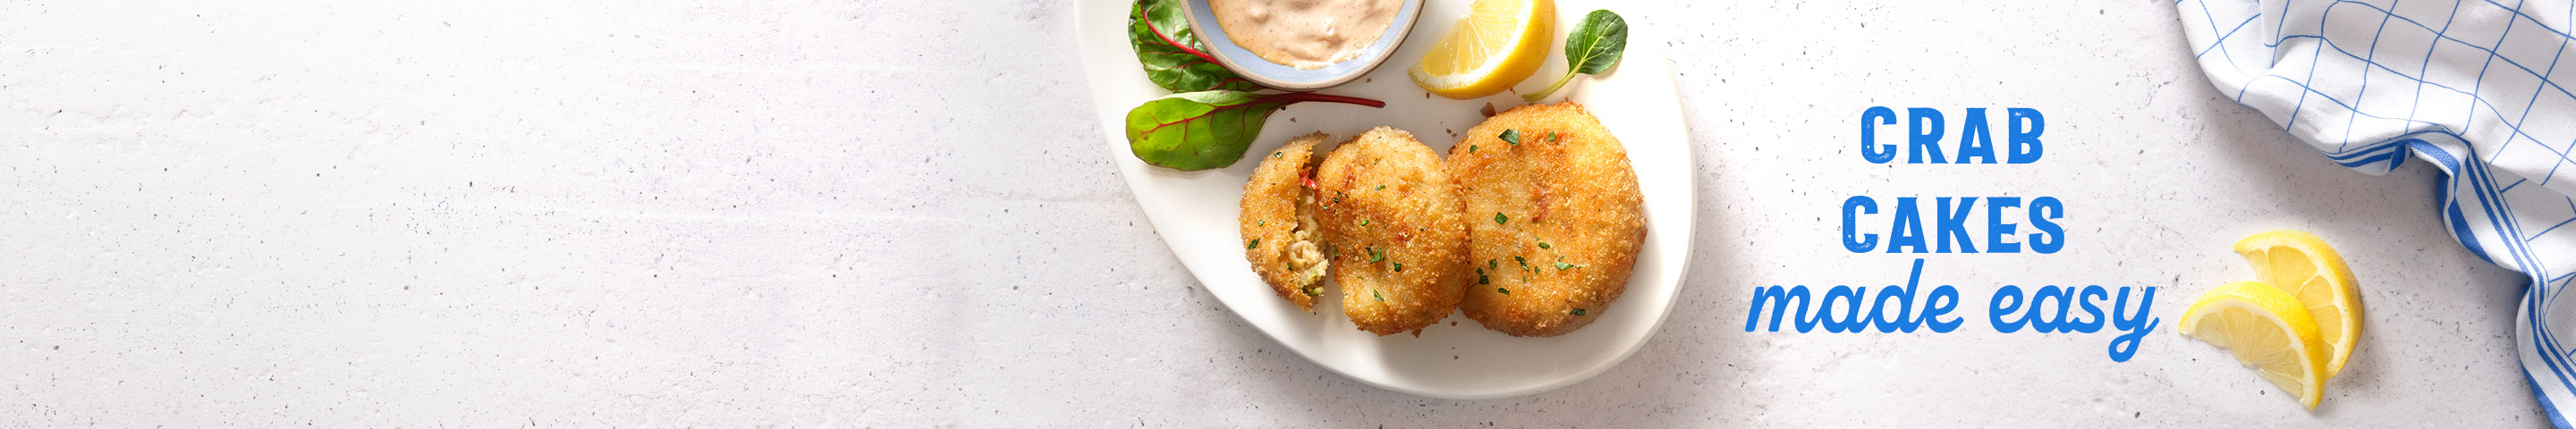 Crab cakes made easy